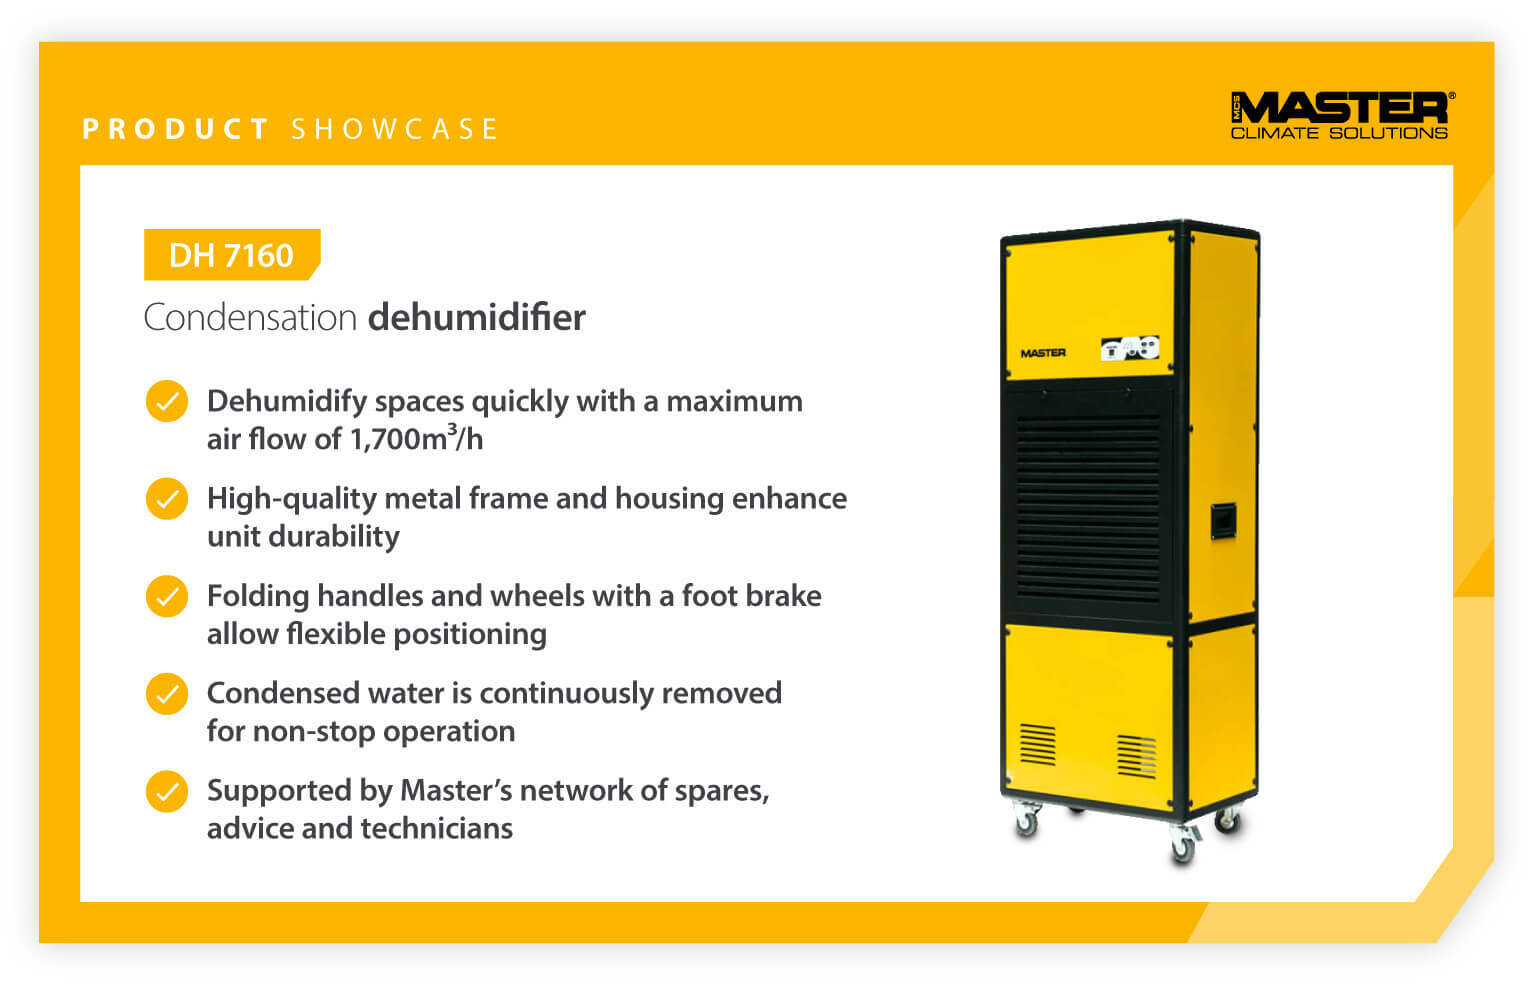 Master condensation dehumidifier product showcase and features - Infographic image